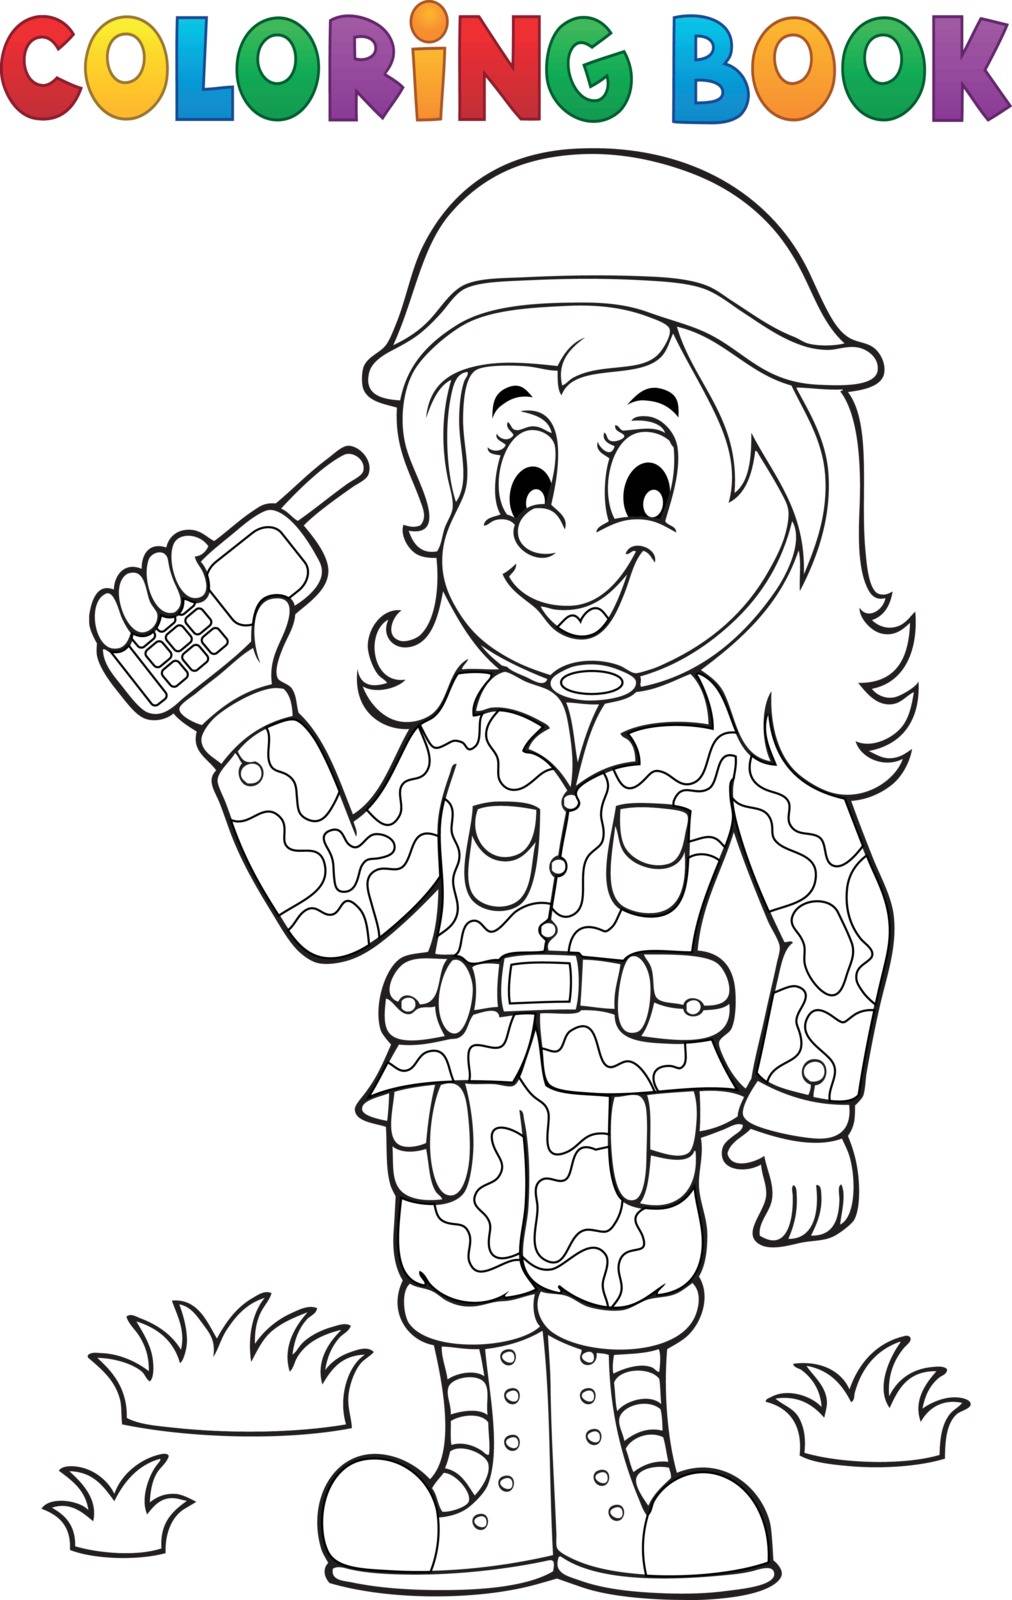 Coloring book female soldier theme 1 - eps10 vector illustration.